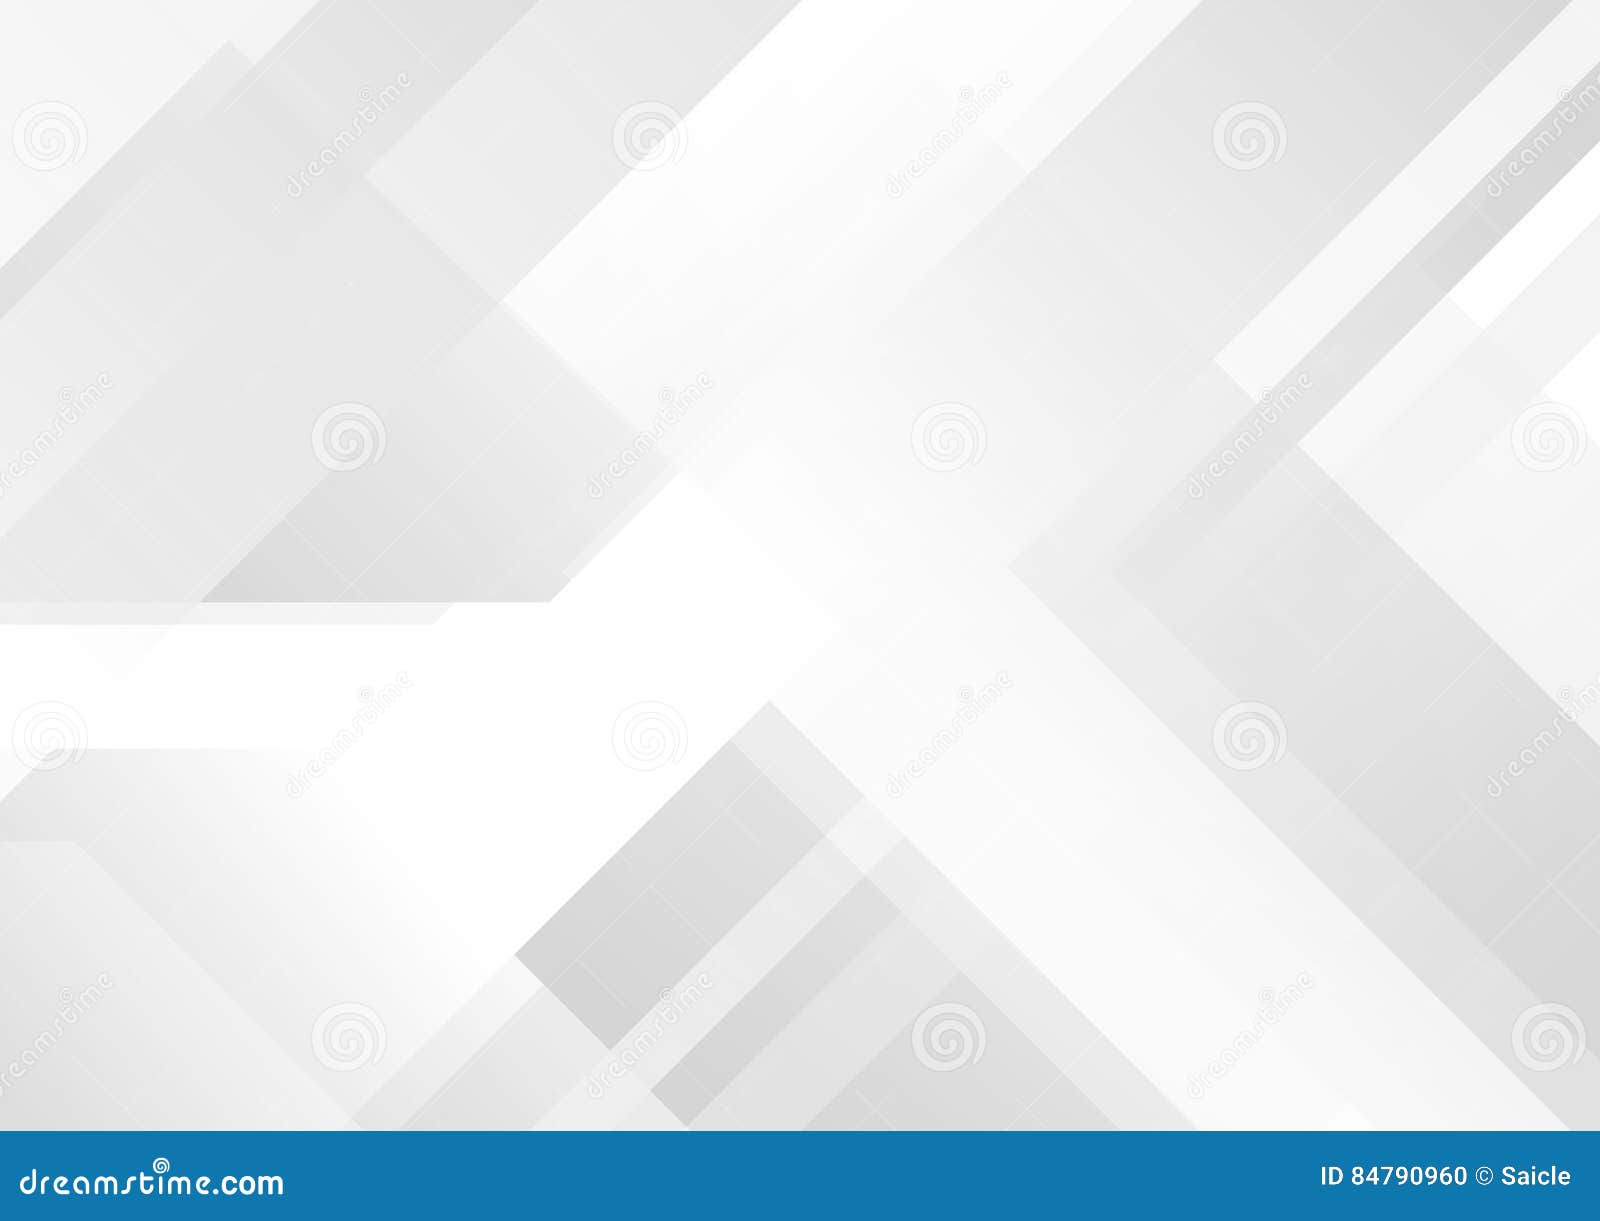 abstract grey and white tech geometric background